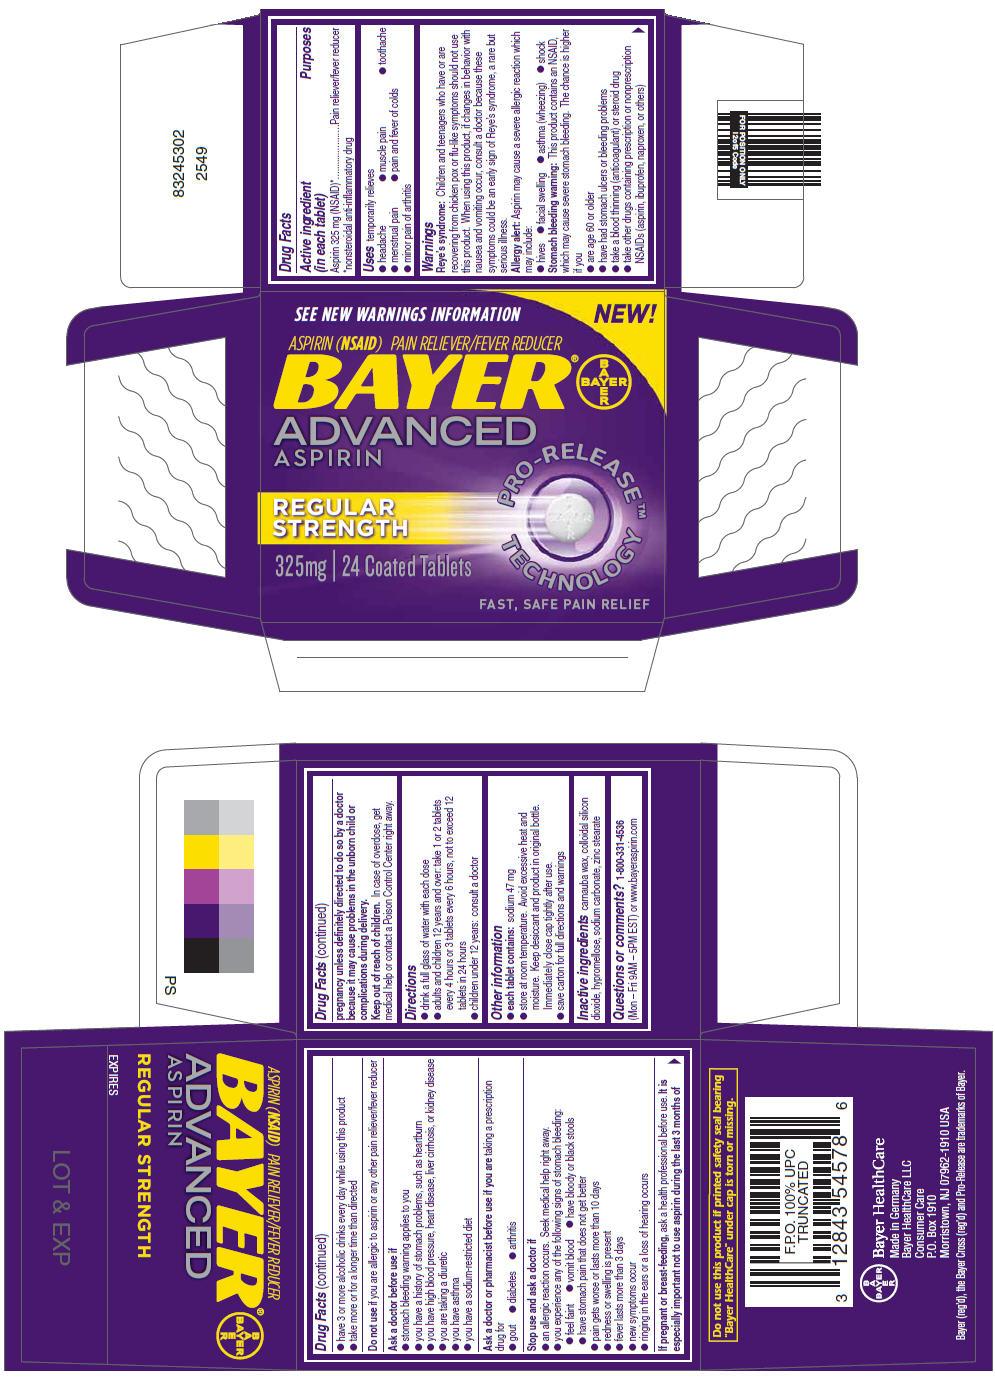 BAYER ADVANCED ASPIRIN REGULAR STRENGTH aspirin tablet Product Information Product T ype HUMAN OTC DRUG Ite m Code (Source ) NDC:0 28 0-26 0 5 Route of Ad minis tration ORAL Active Ing redient/active